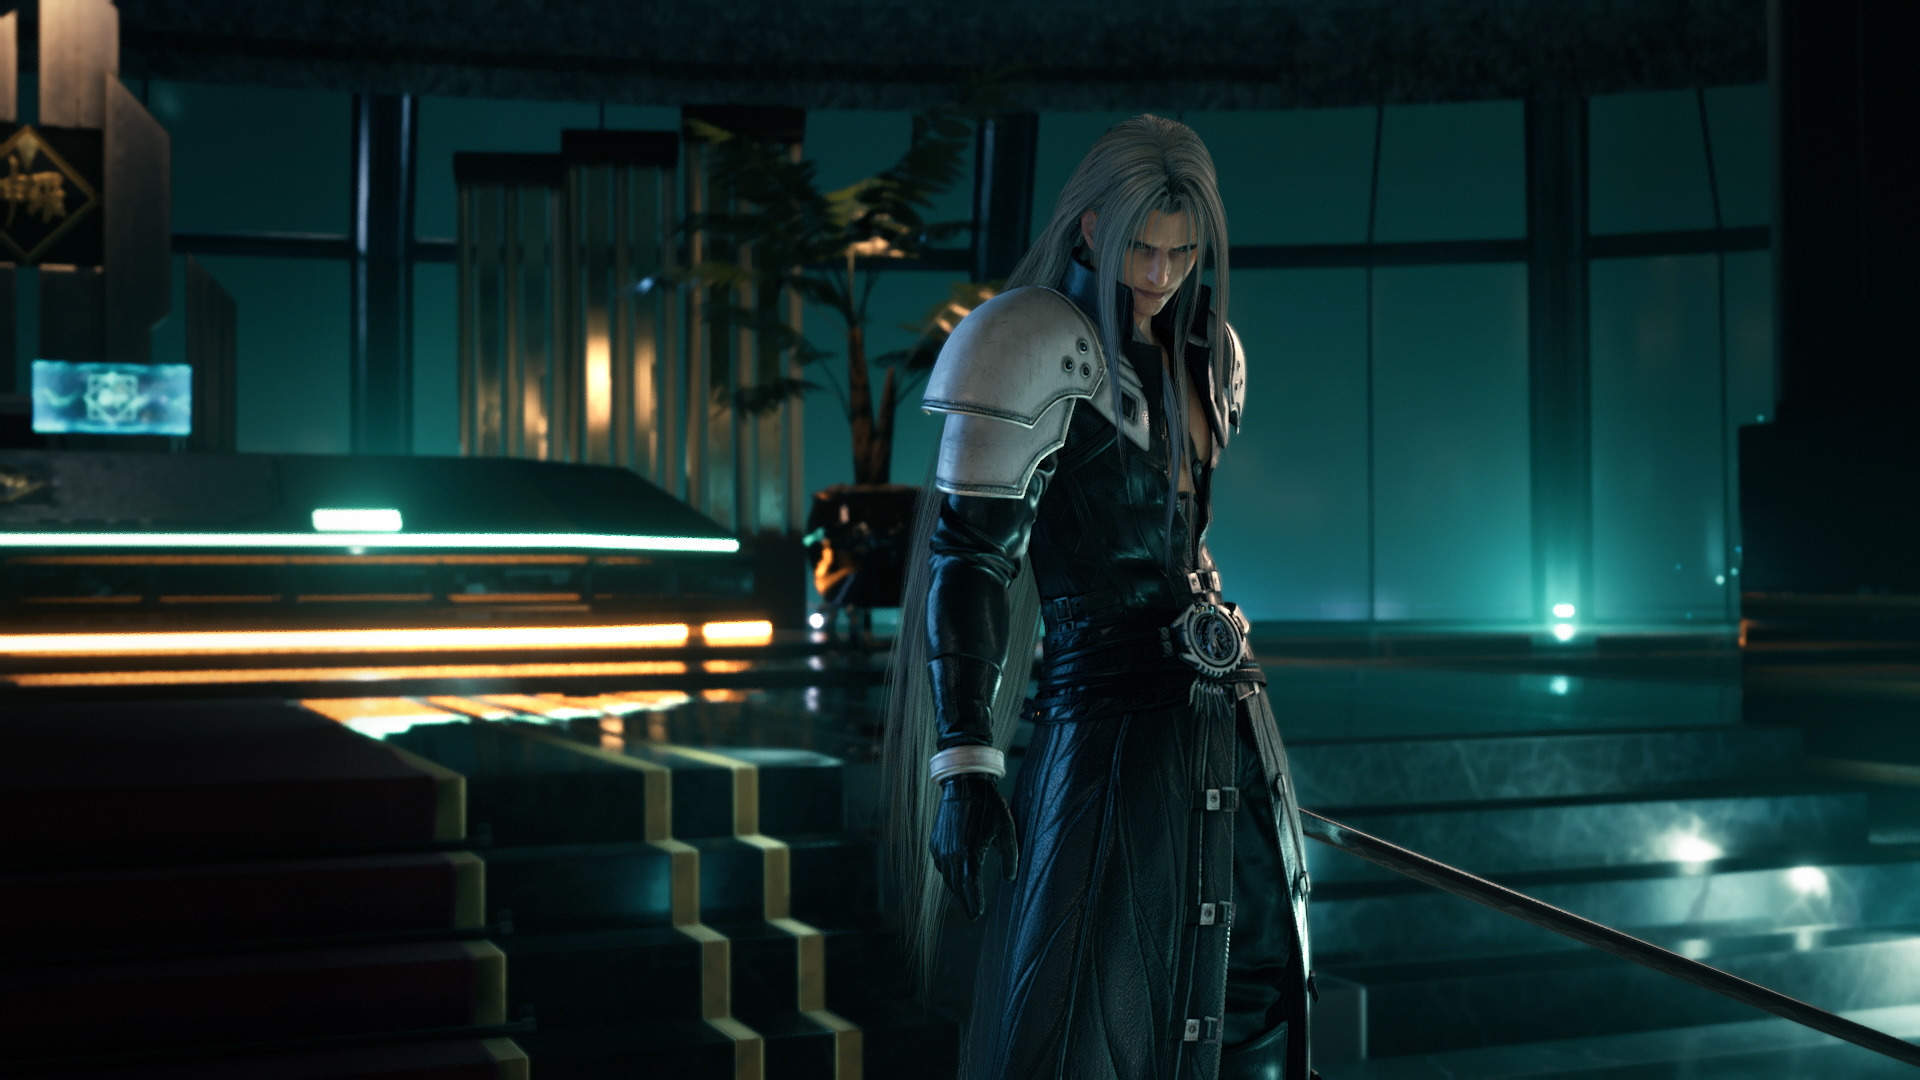 An image of Sephiroth from FFVII Remake